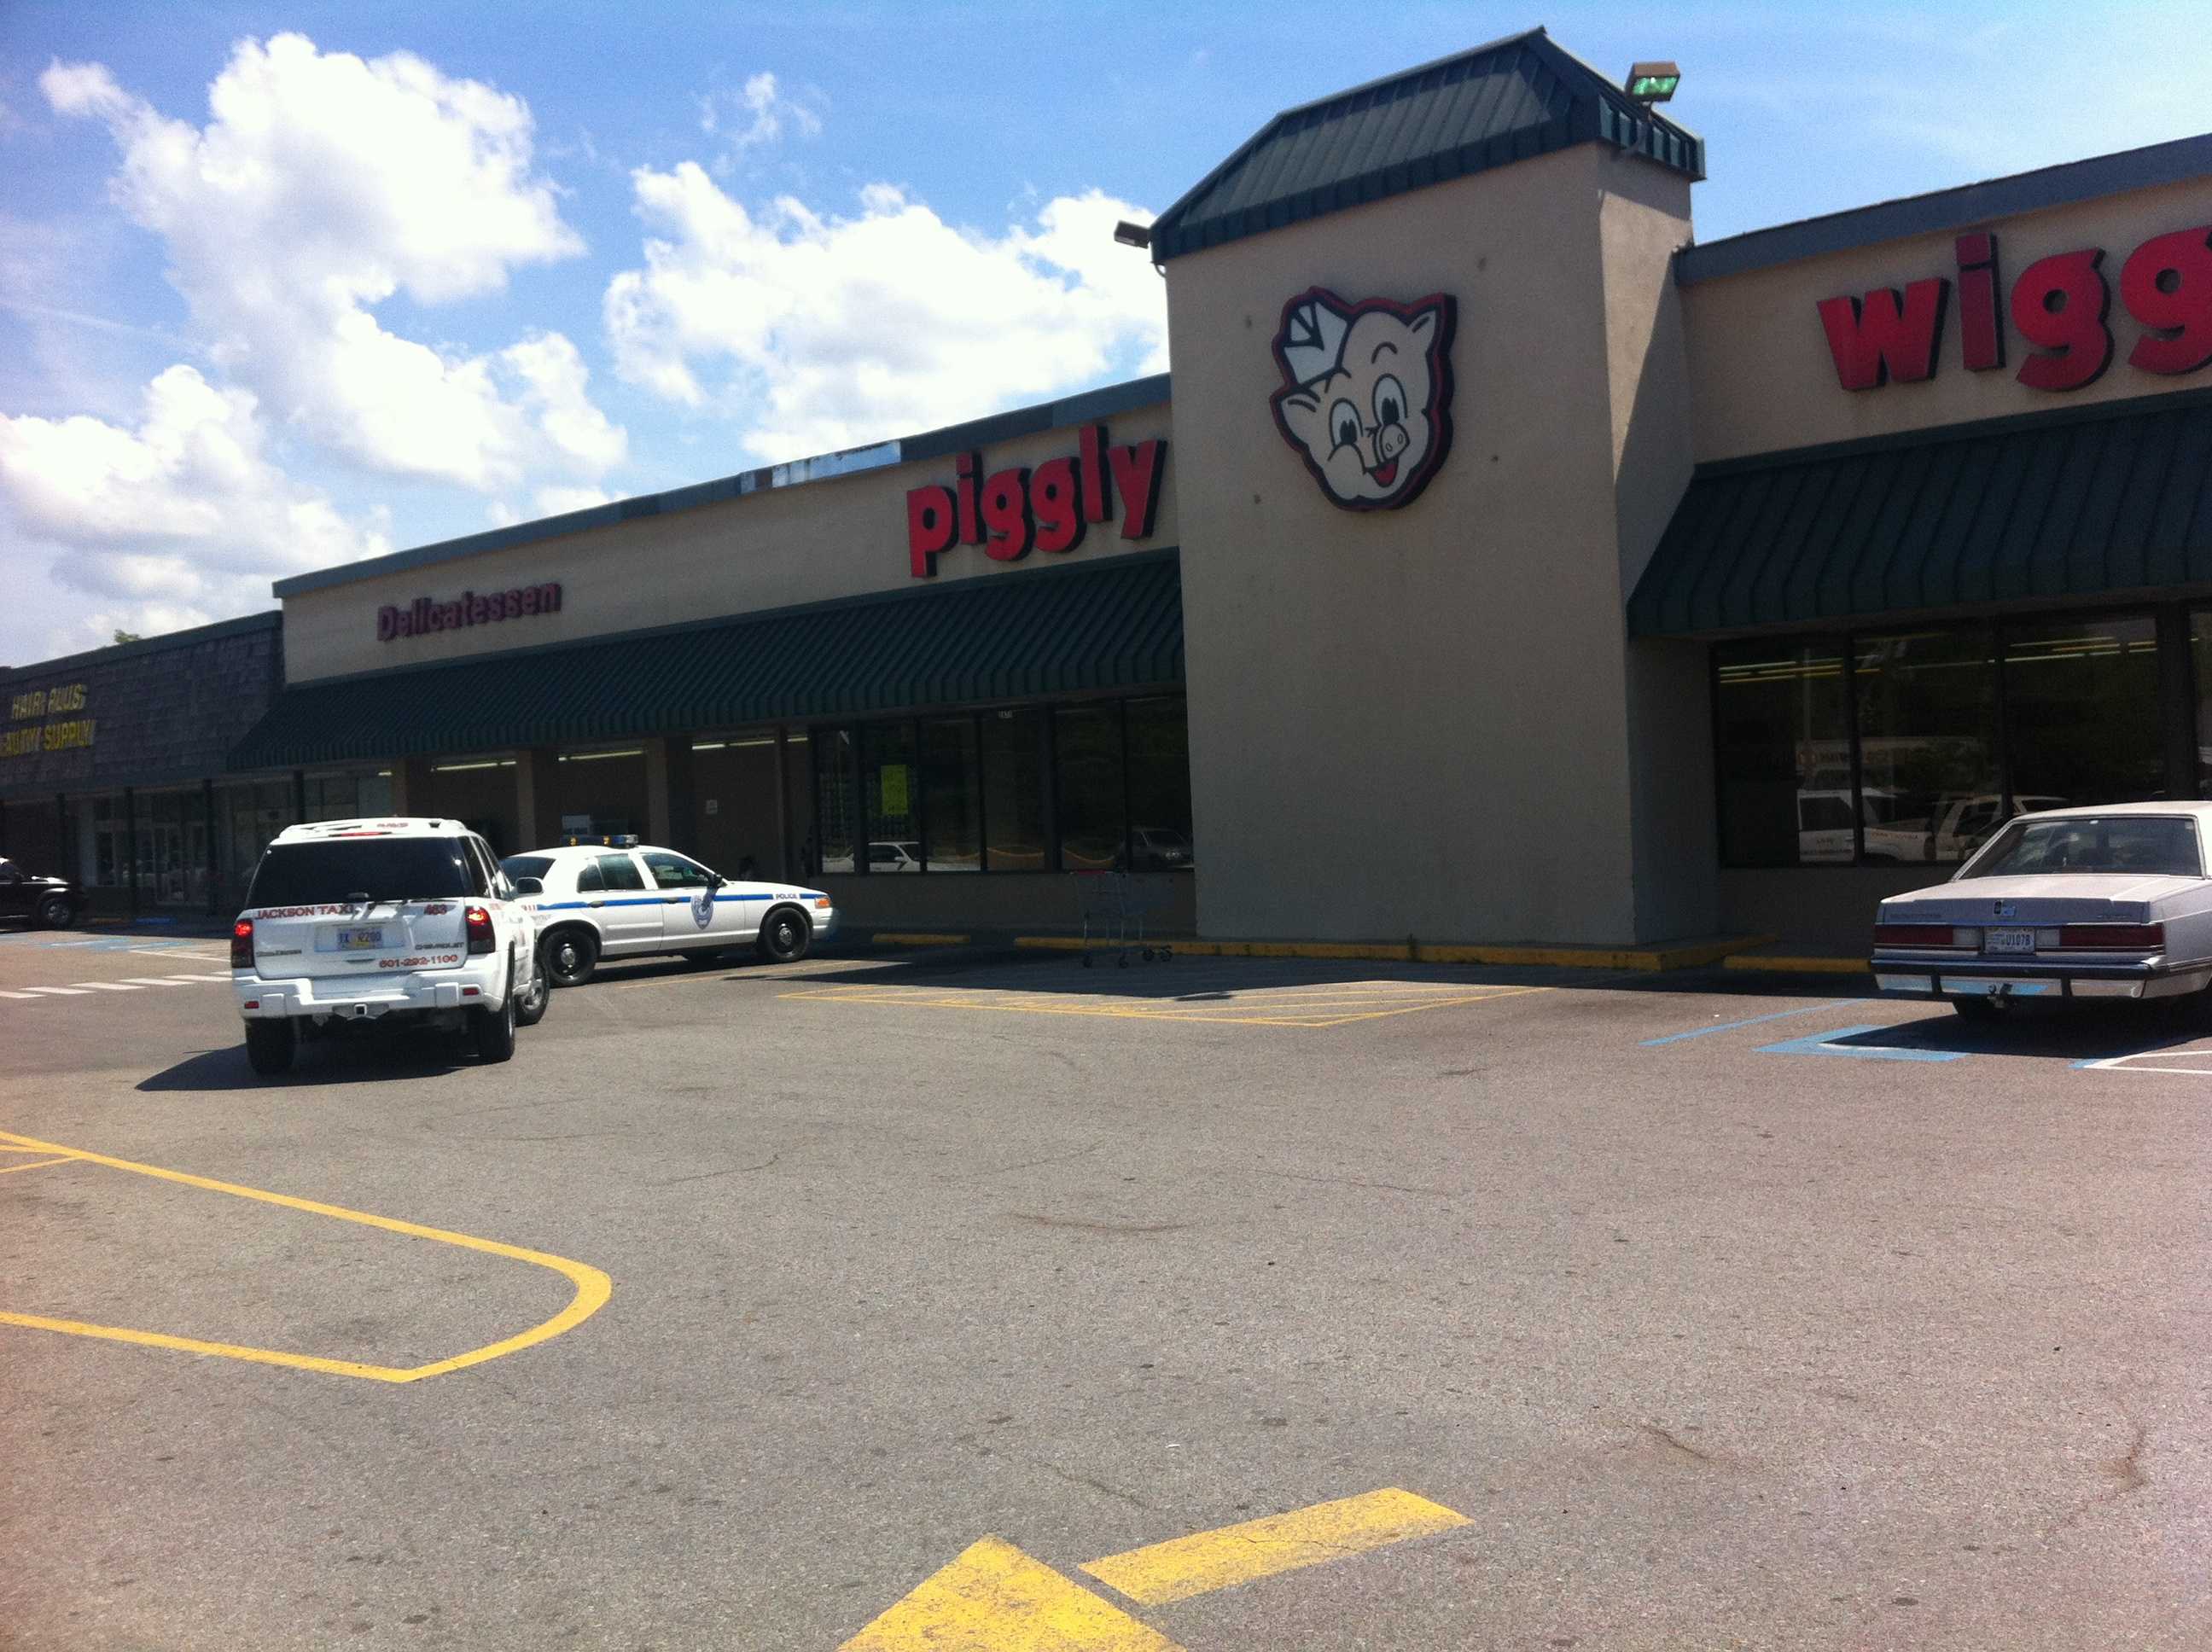 piggly wiggly locations arkansas